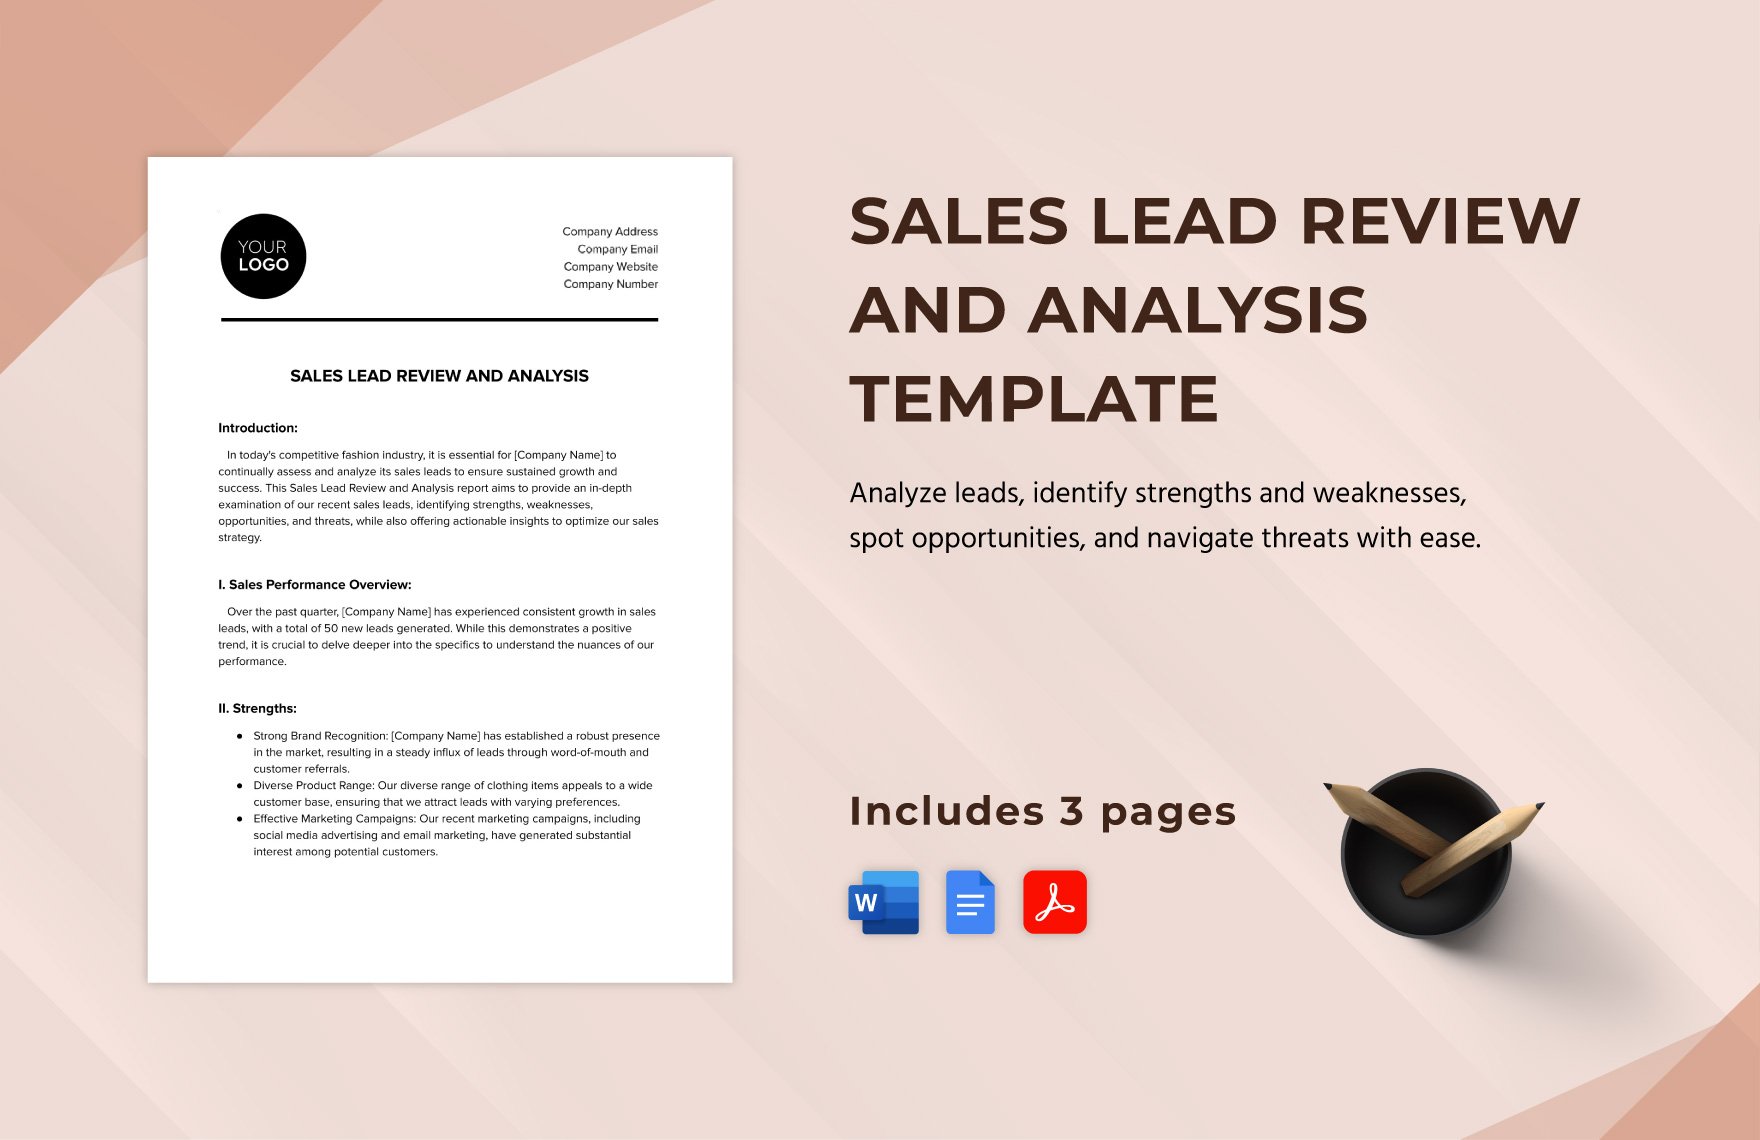 Sales Lead Review and Analysis Template